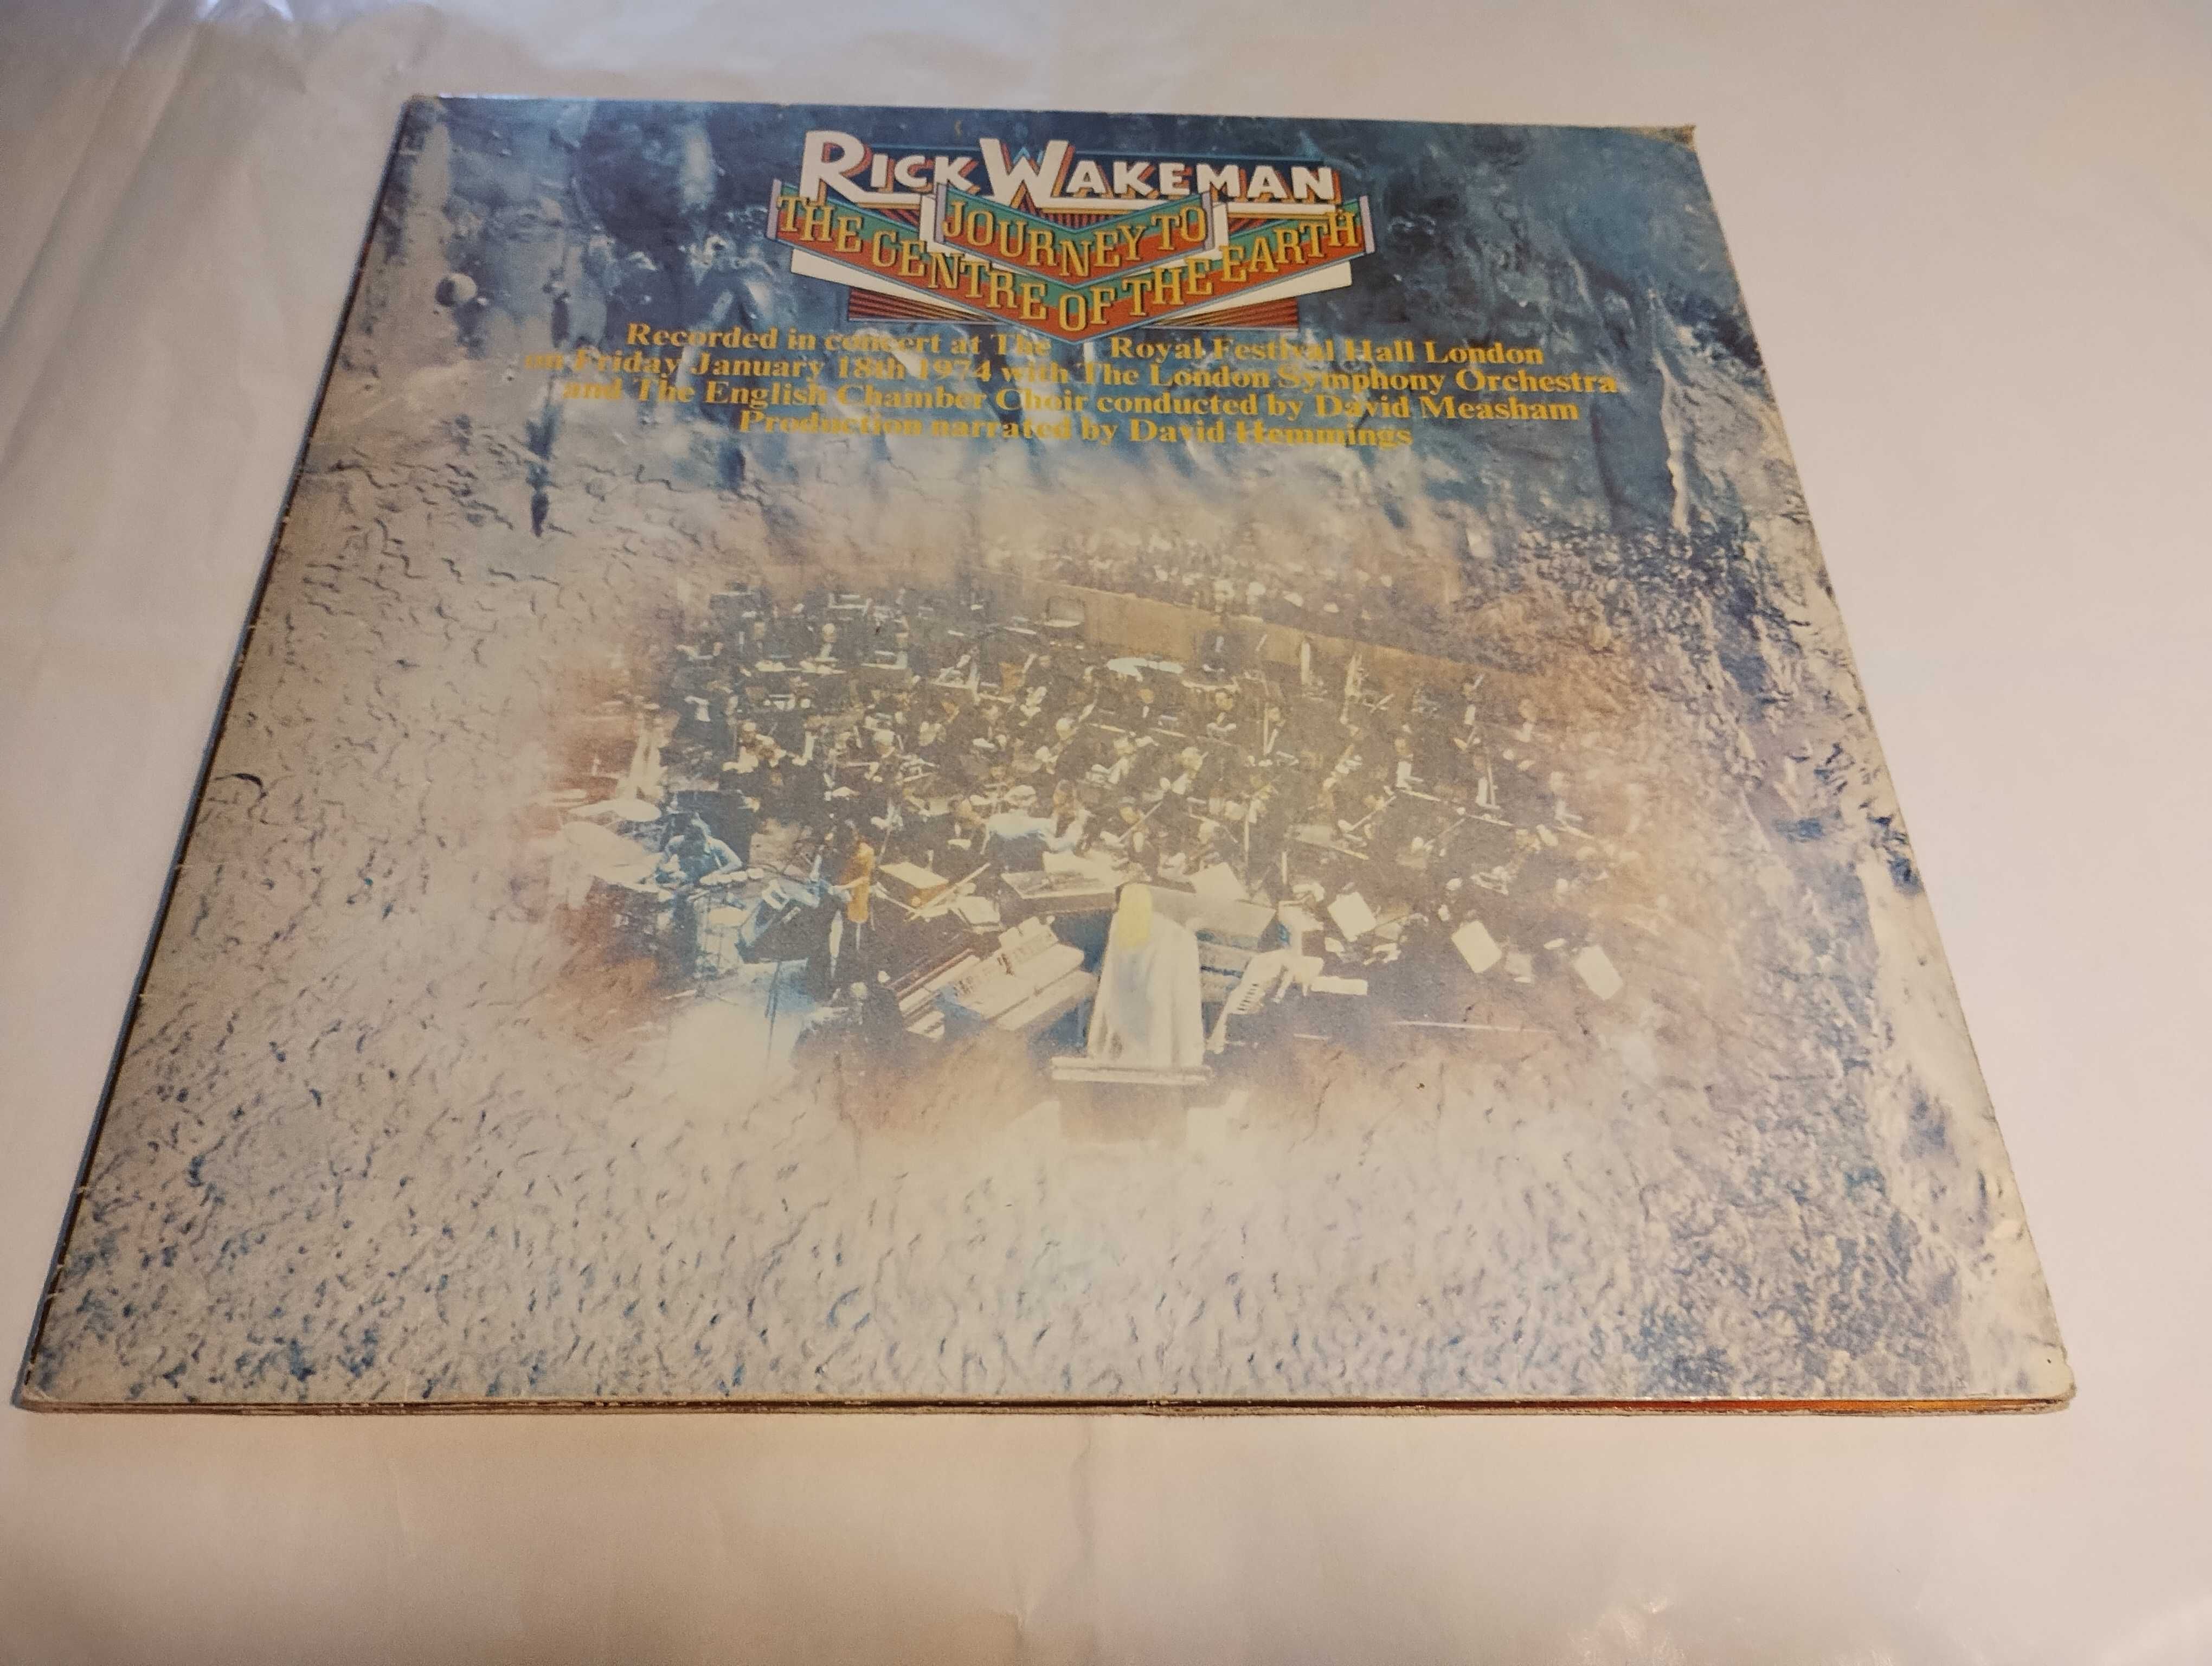 Rick Wakeman Journey to the centre of the earth LP wyd. I U.K.